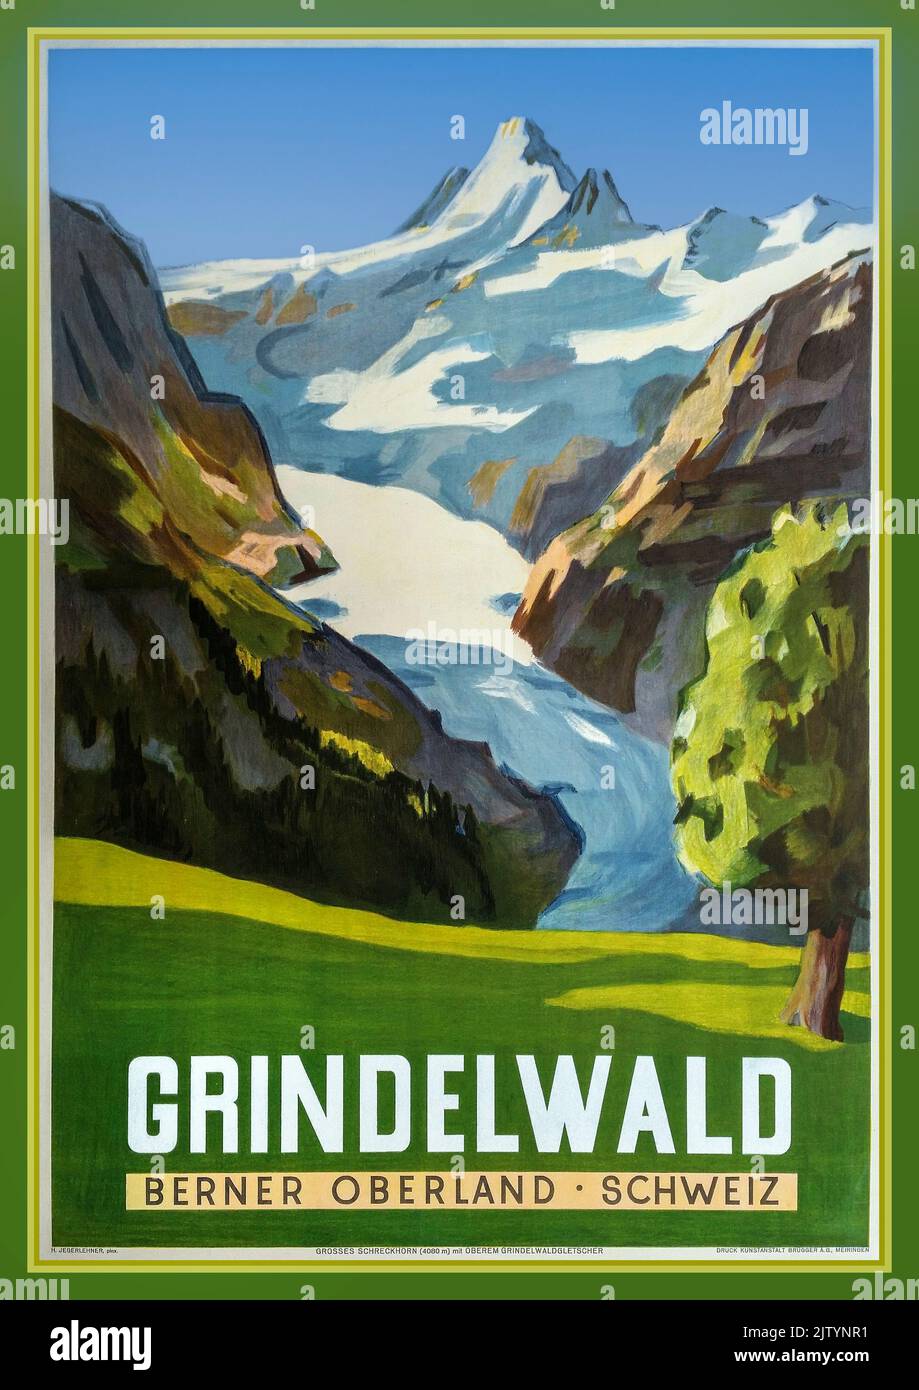 Vintage Travel Poster Grindelwald, Berner Oberland, Schweiz Hans JEGERLEHNER circa 1942 a village in Switzerland’s Bernese Alps, is a popular gateway for the Jungfrau Region, with skiing in winter and hiking in summer. It's also a base for mountain-climbing ascents up the iconic north face of Eiger Mountain. BERNER OBERLAND SCHWEIZ Stock Photo